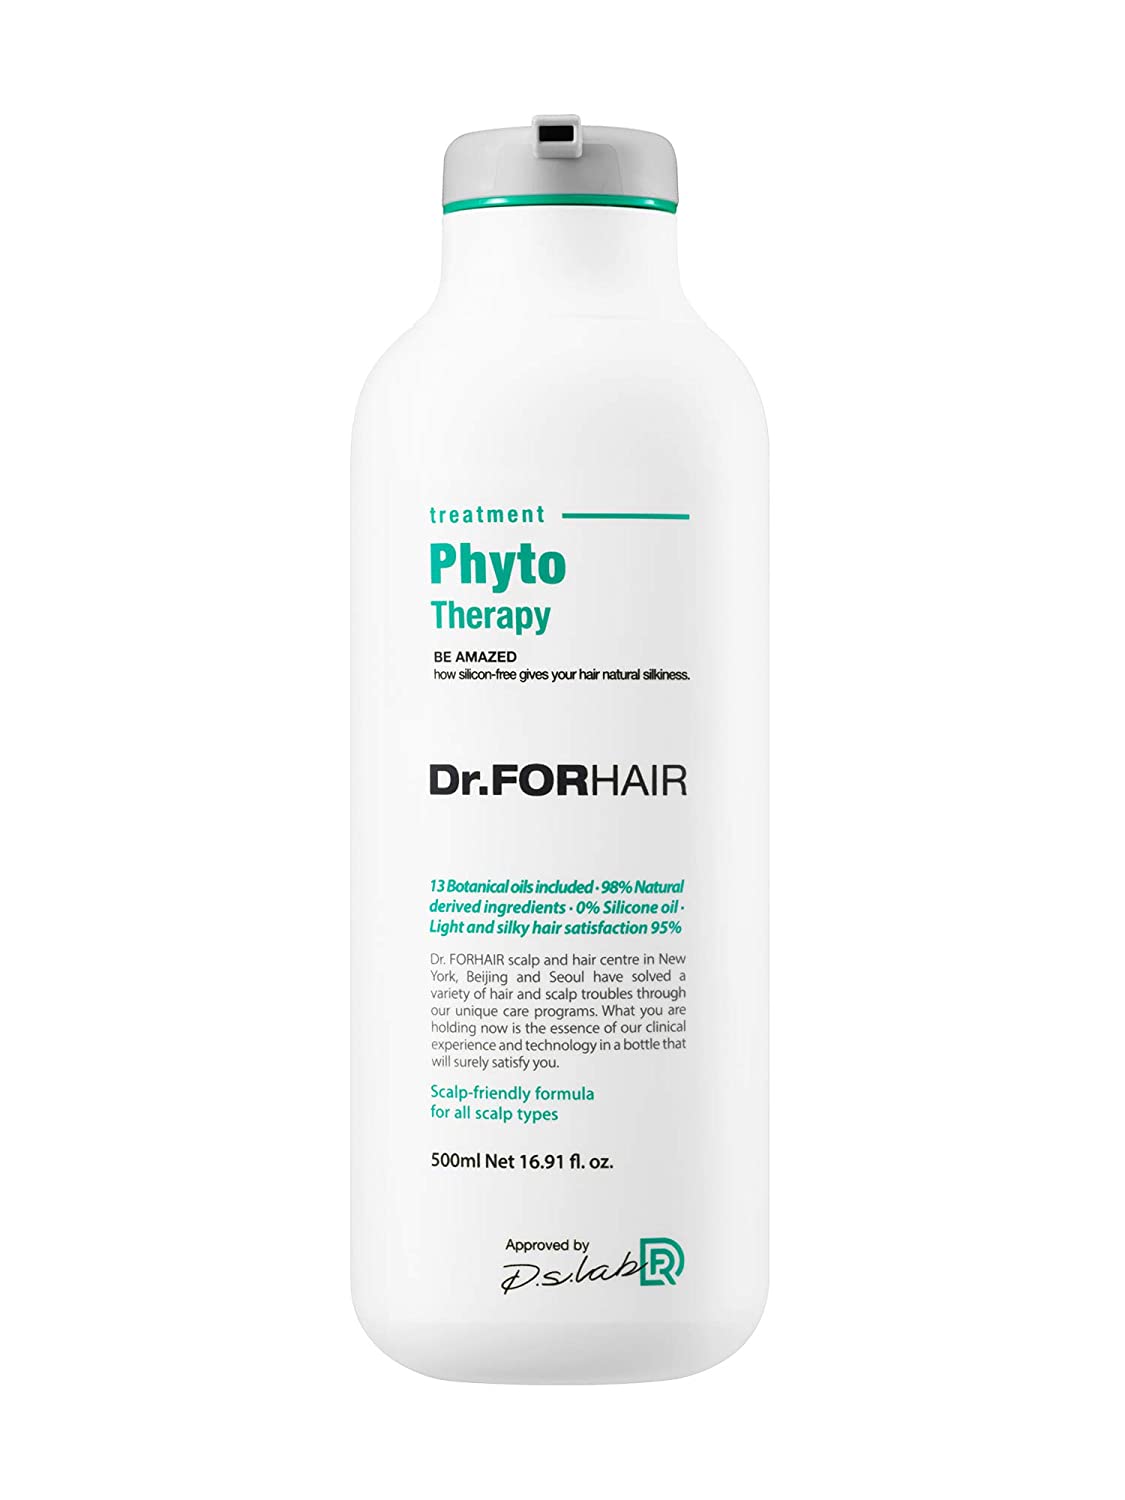 Dr.FORHAIR Phyto Therapy Treatment 500ml / 16.91 fl. oz (New Version) - eCosmeticWorld